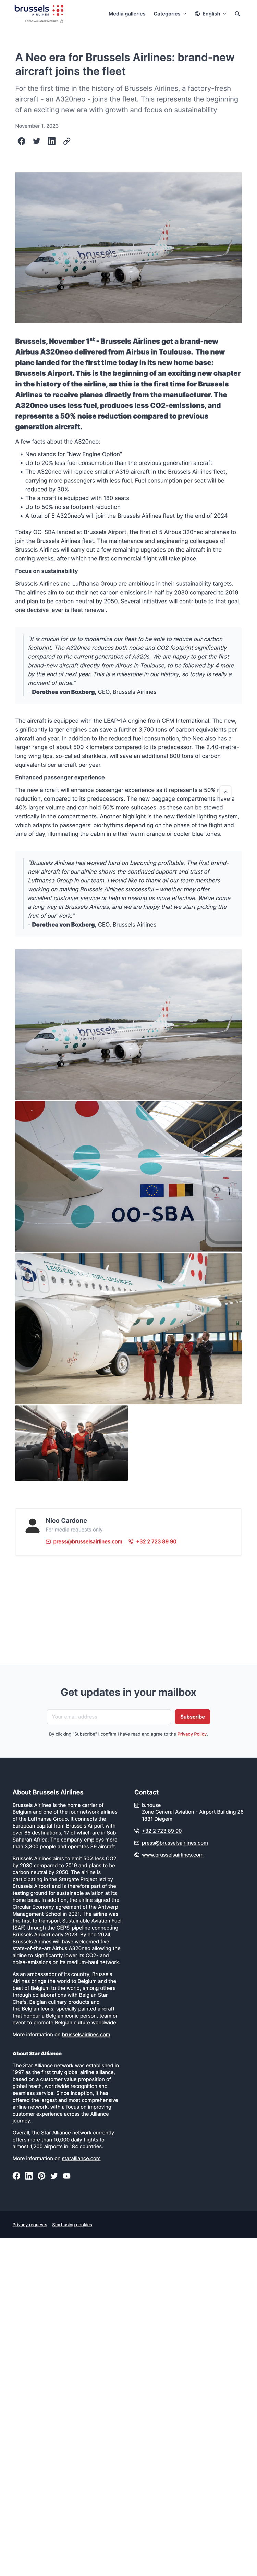 Brand-new aircraft joins the Brussels Airlines fleet